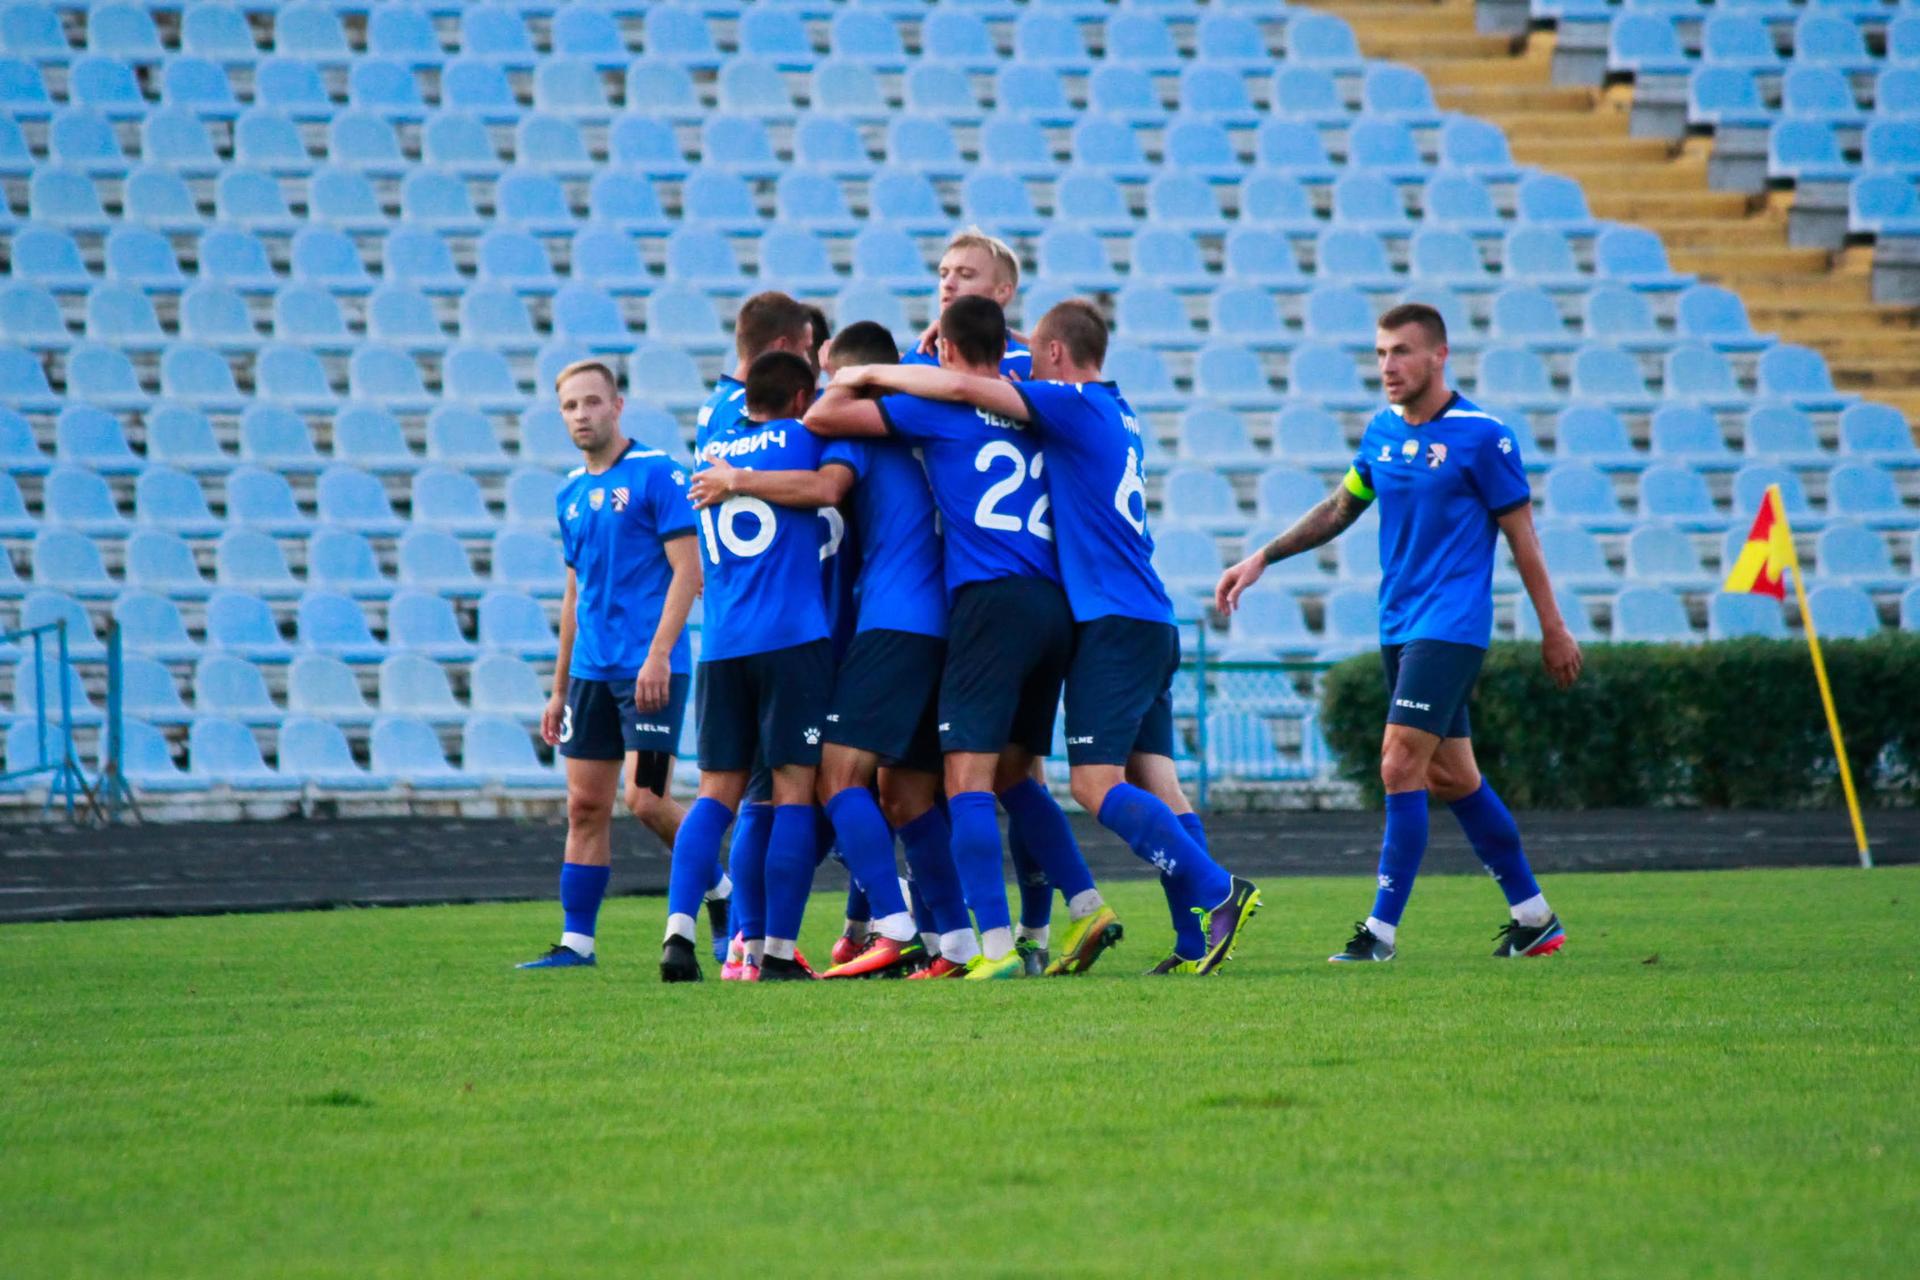 Players from Tavriya Simferopol huddle together at a match earlier this year.